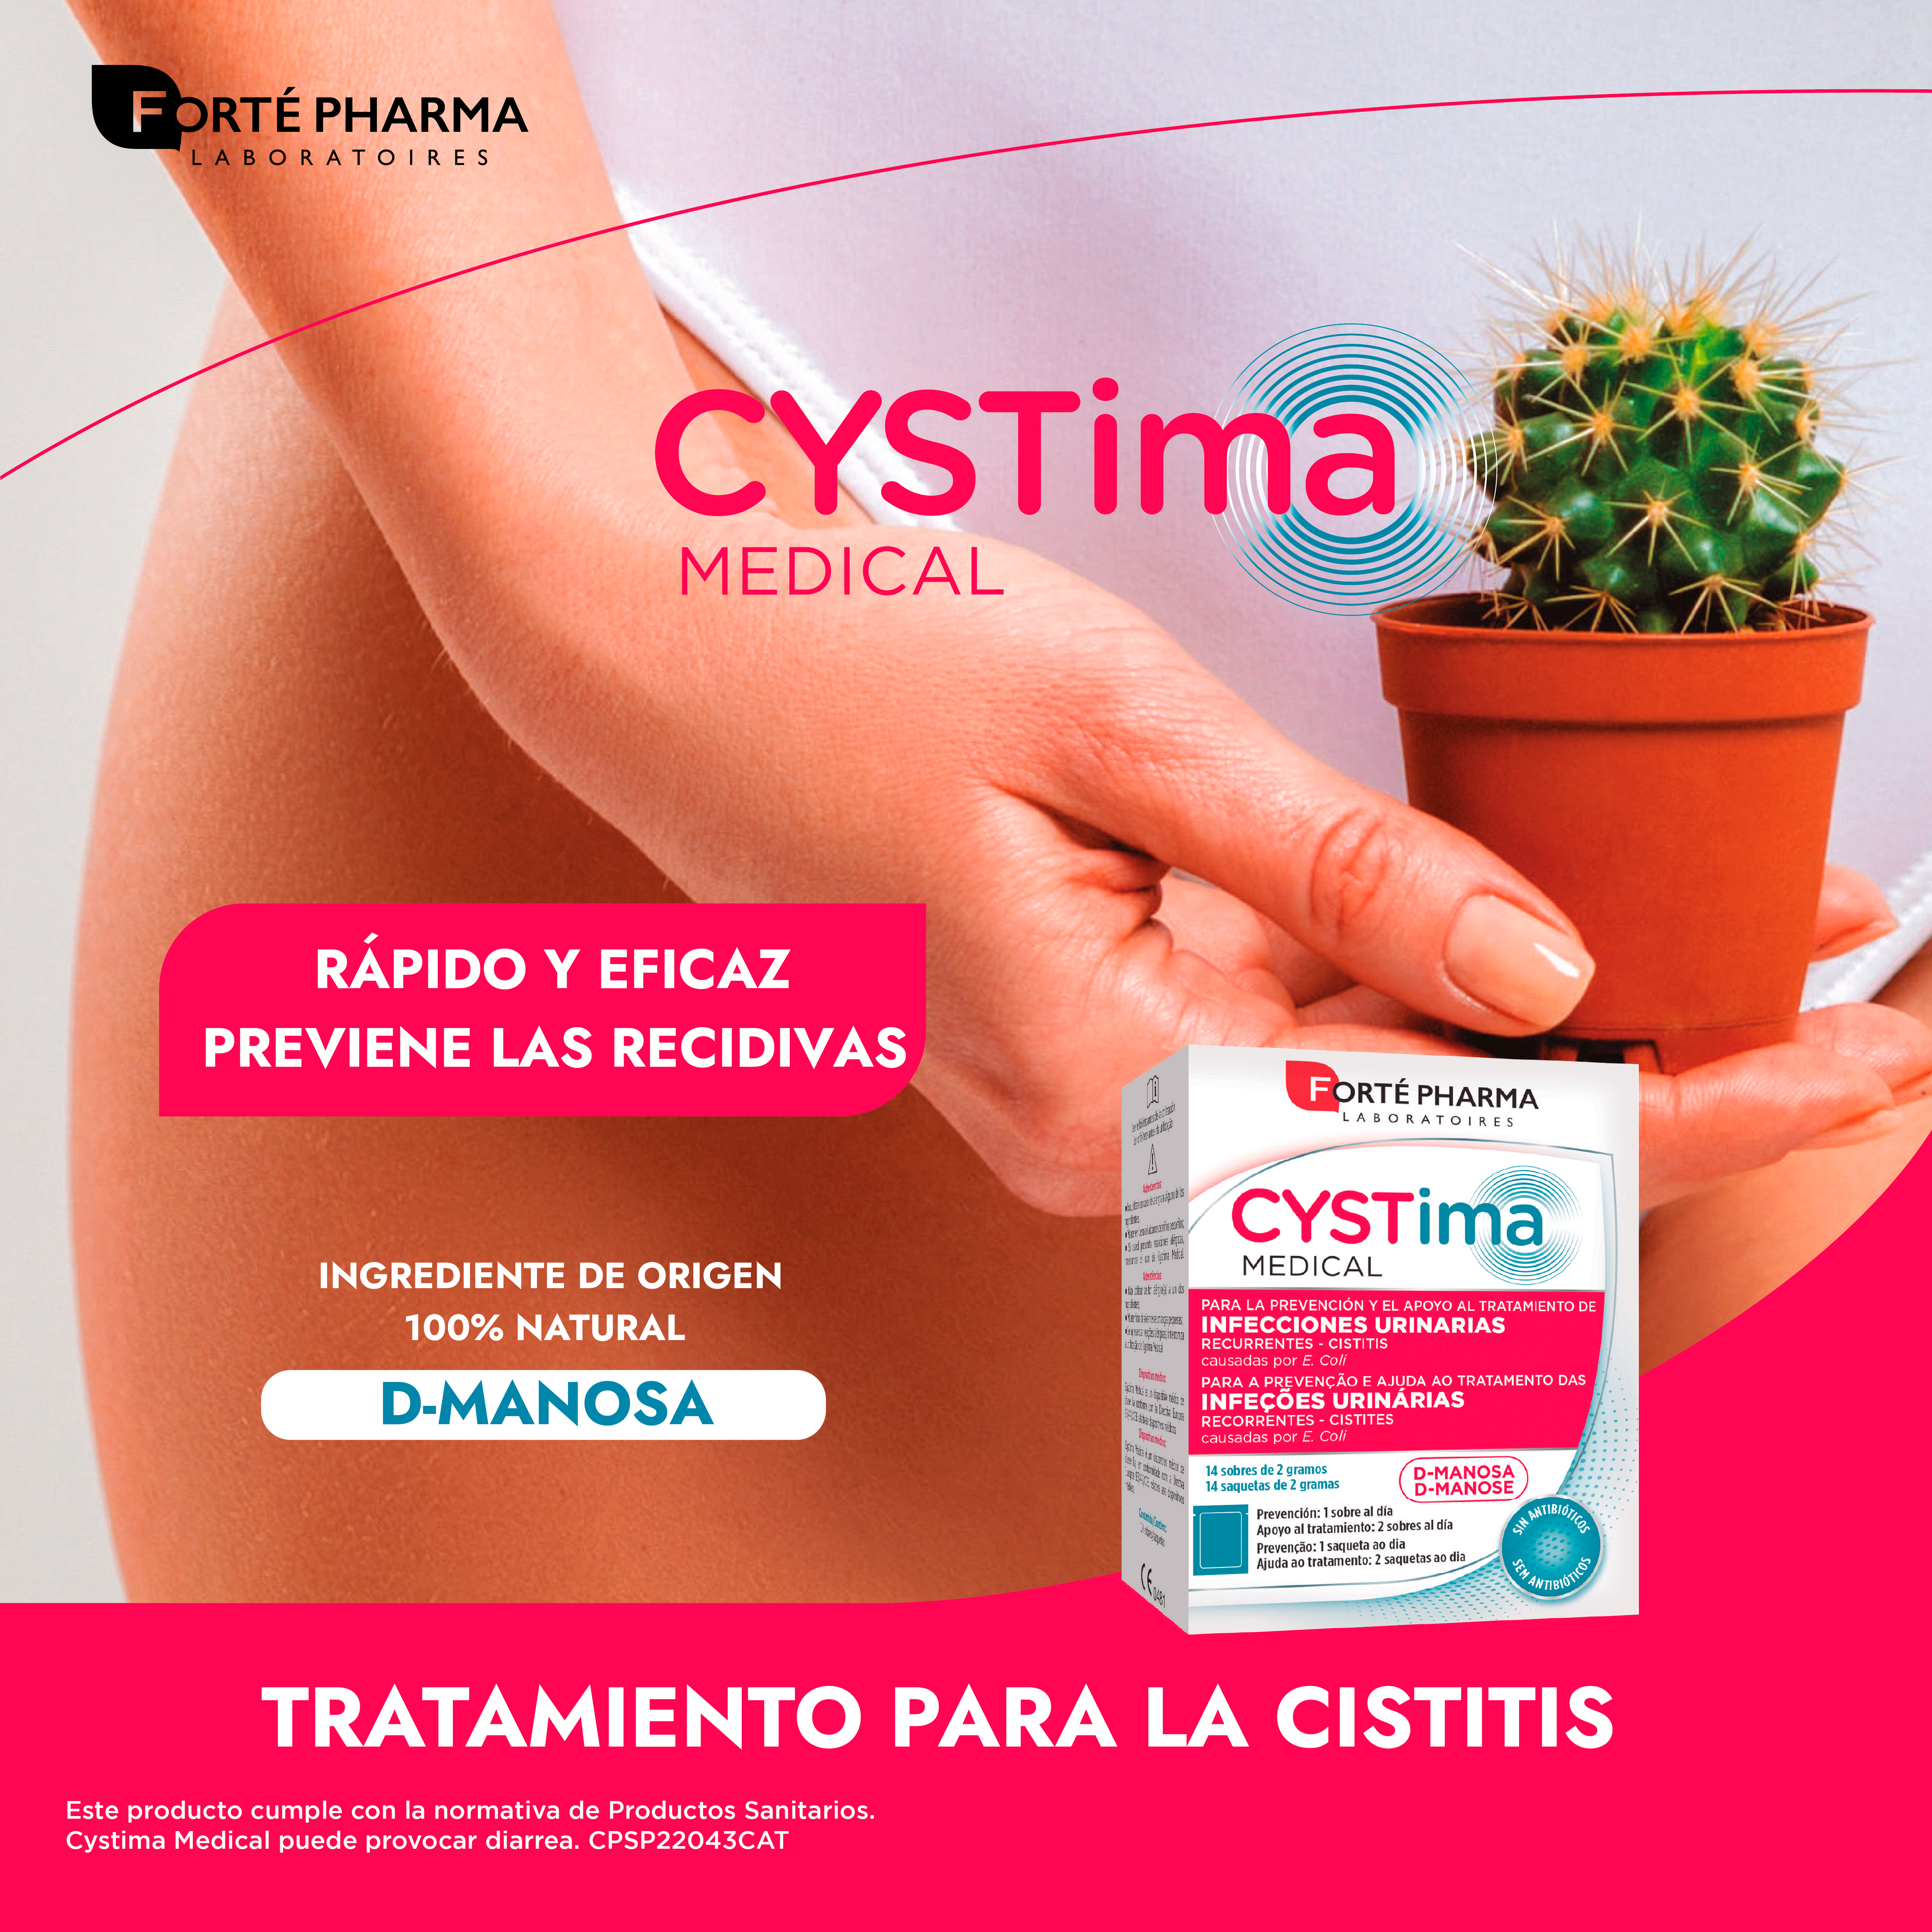 Post producto Cystima Medical